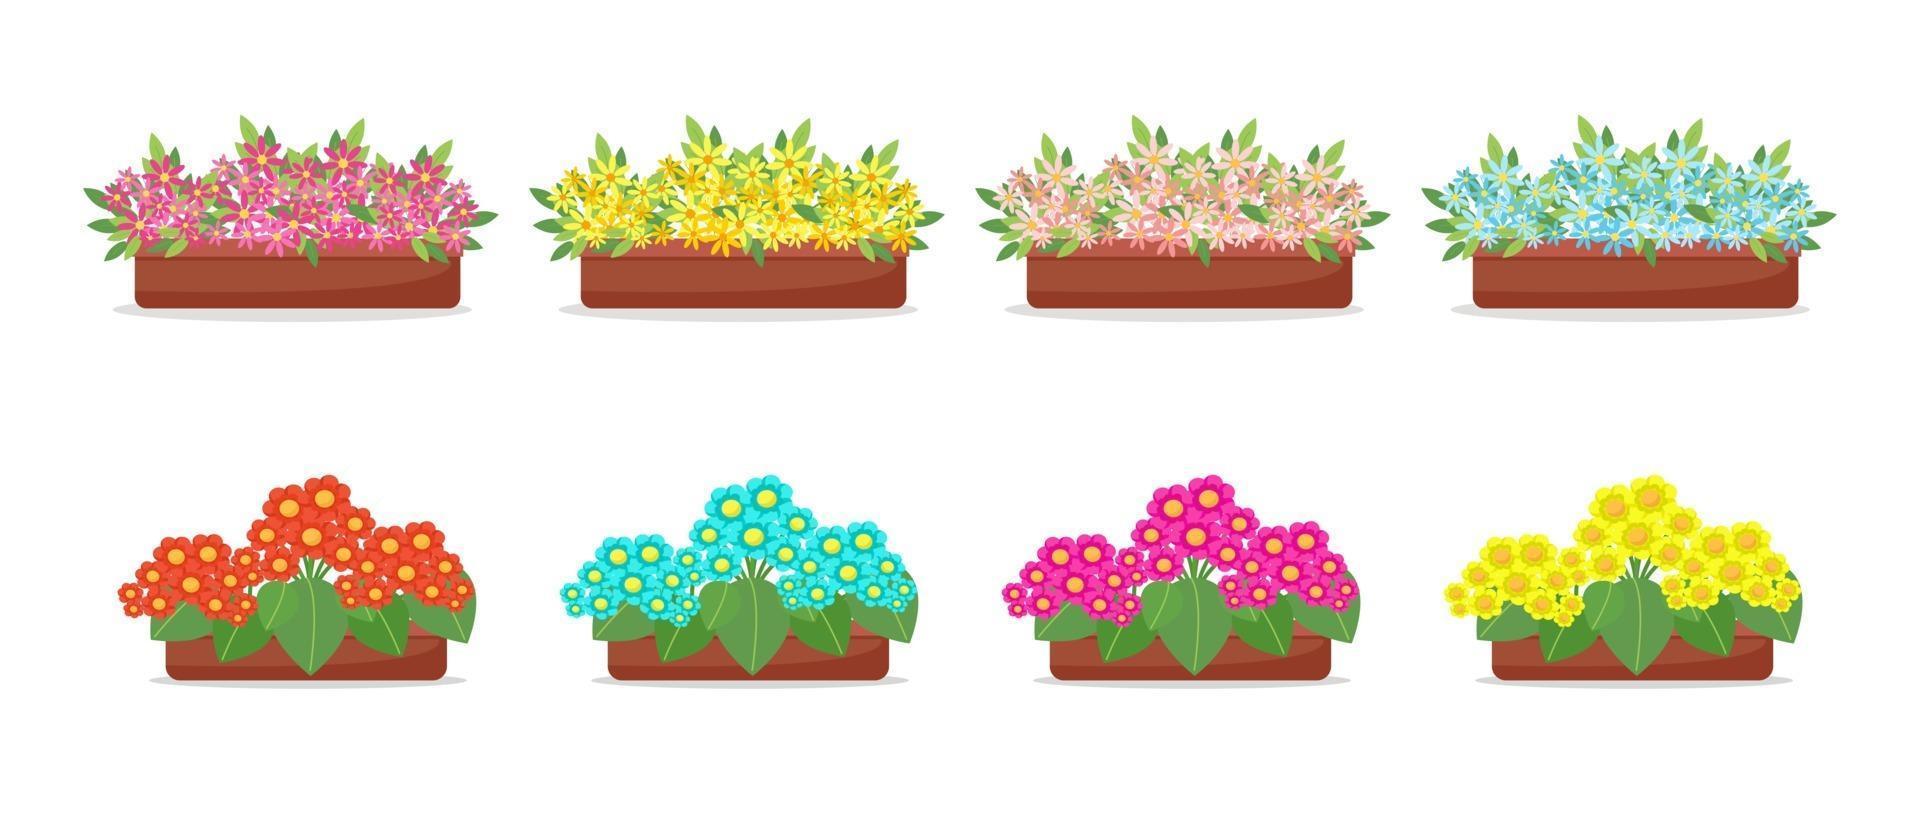 Flowers in pots in flat style set, big collection of spring flowers in boxes, vectors isolated